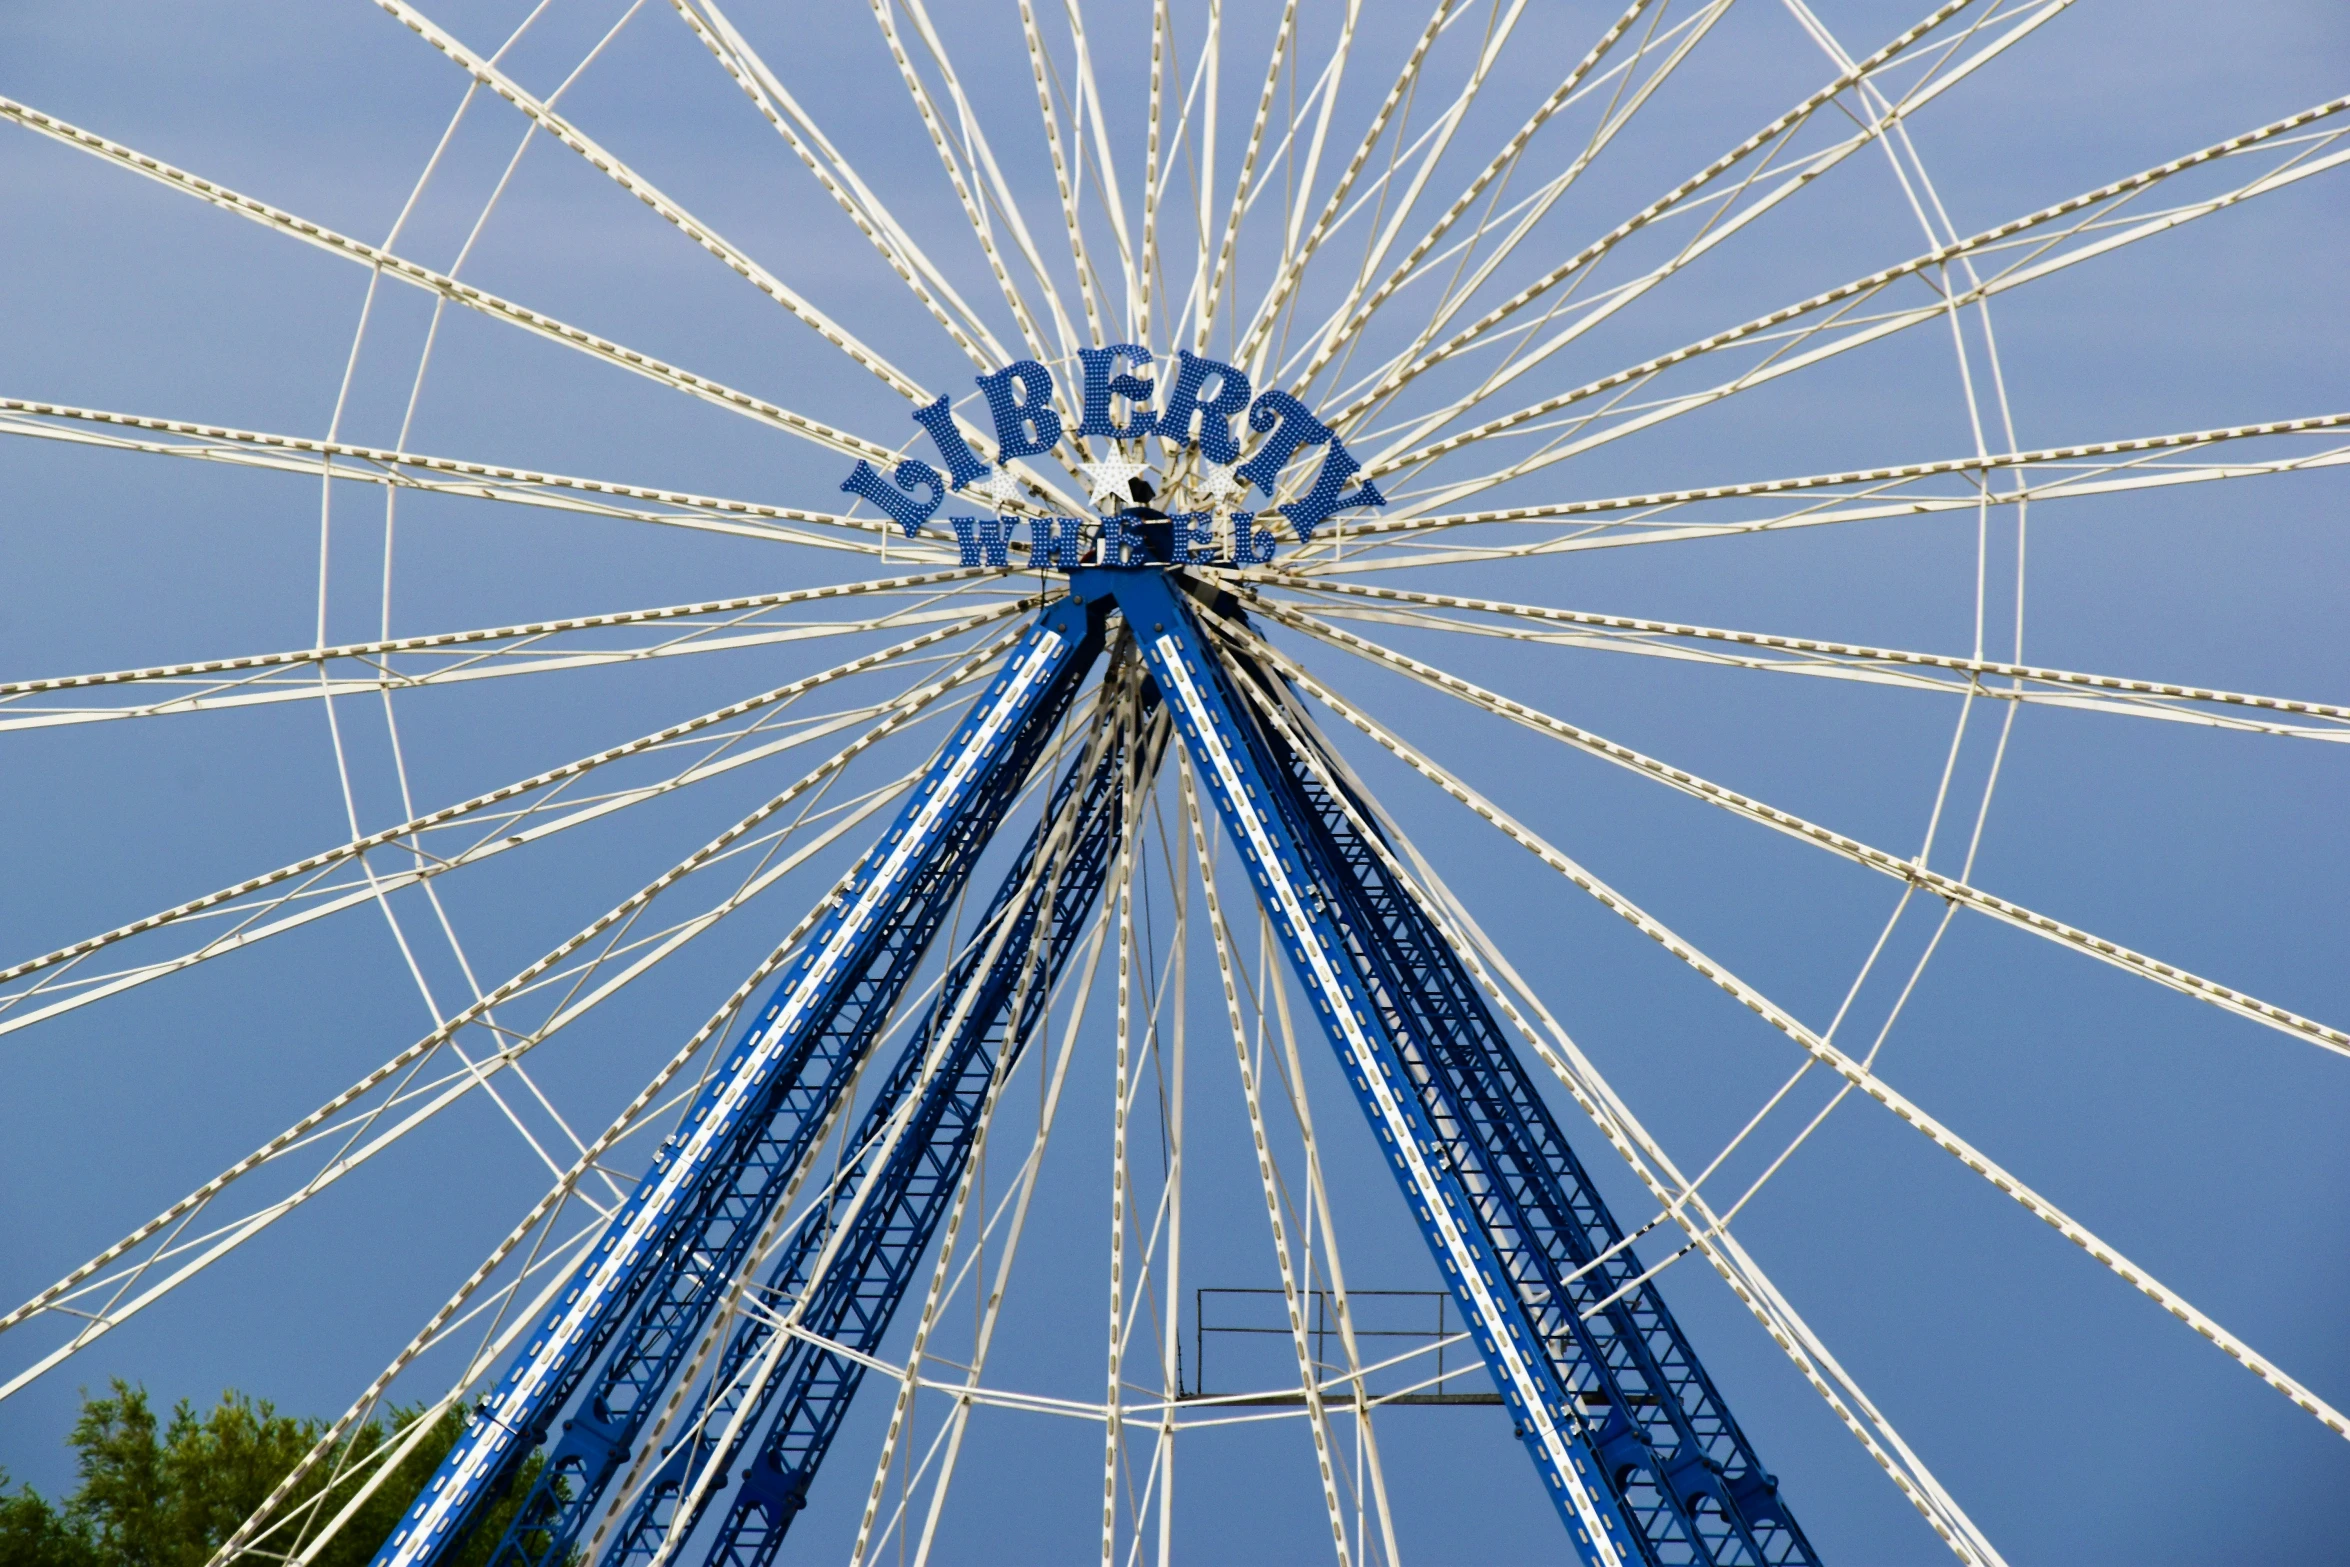 the large ferris wheel sits under a blue sky